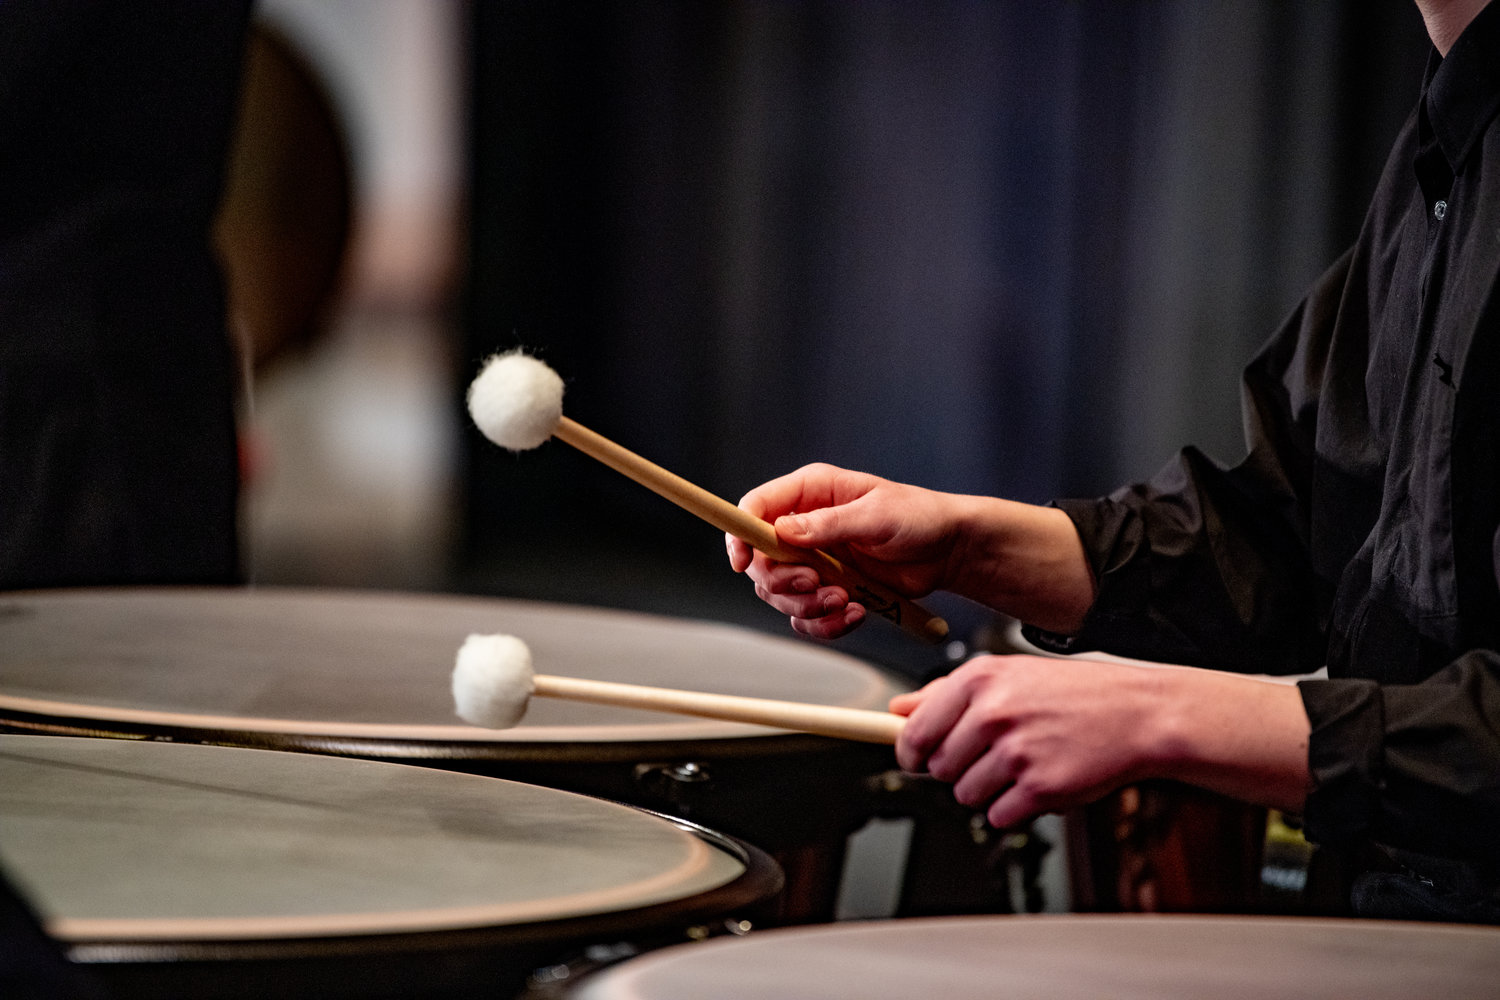 Reece Maopolski of Sullivan West was the sole timpani player in this year's band.